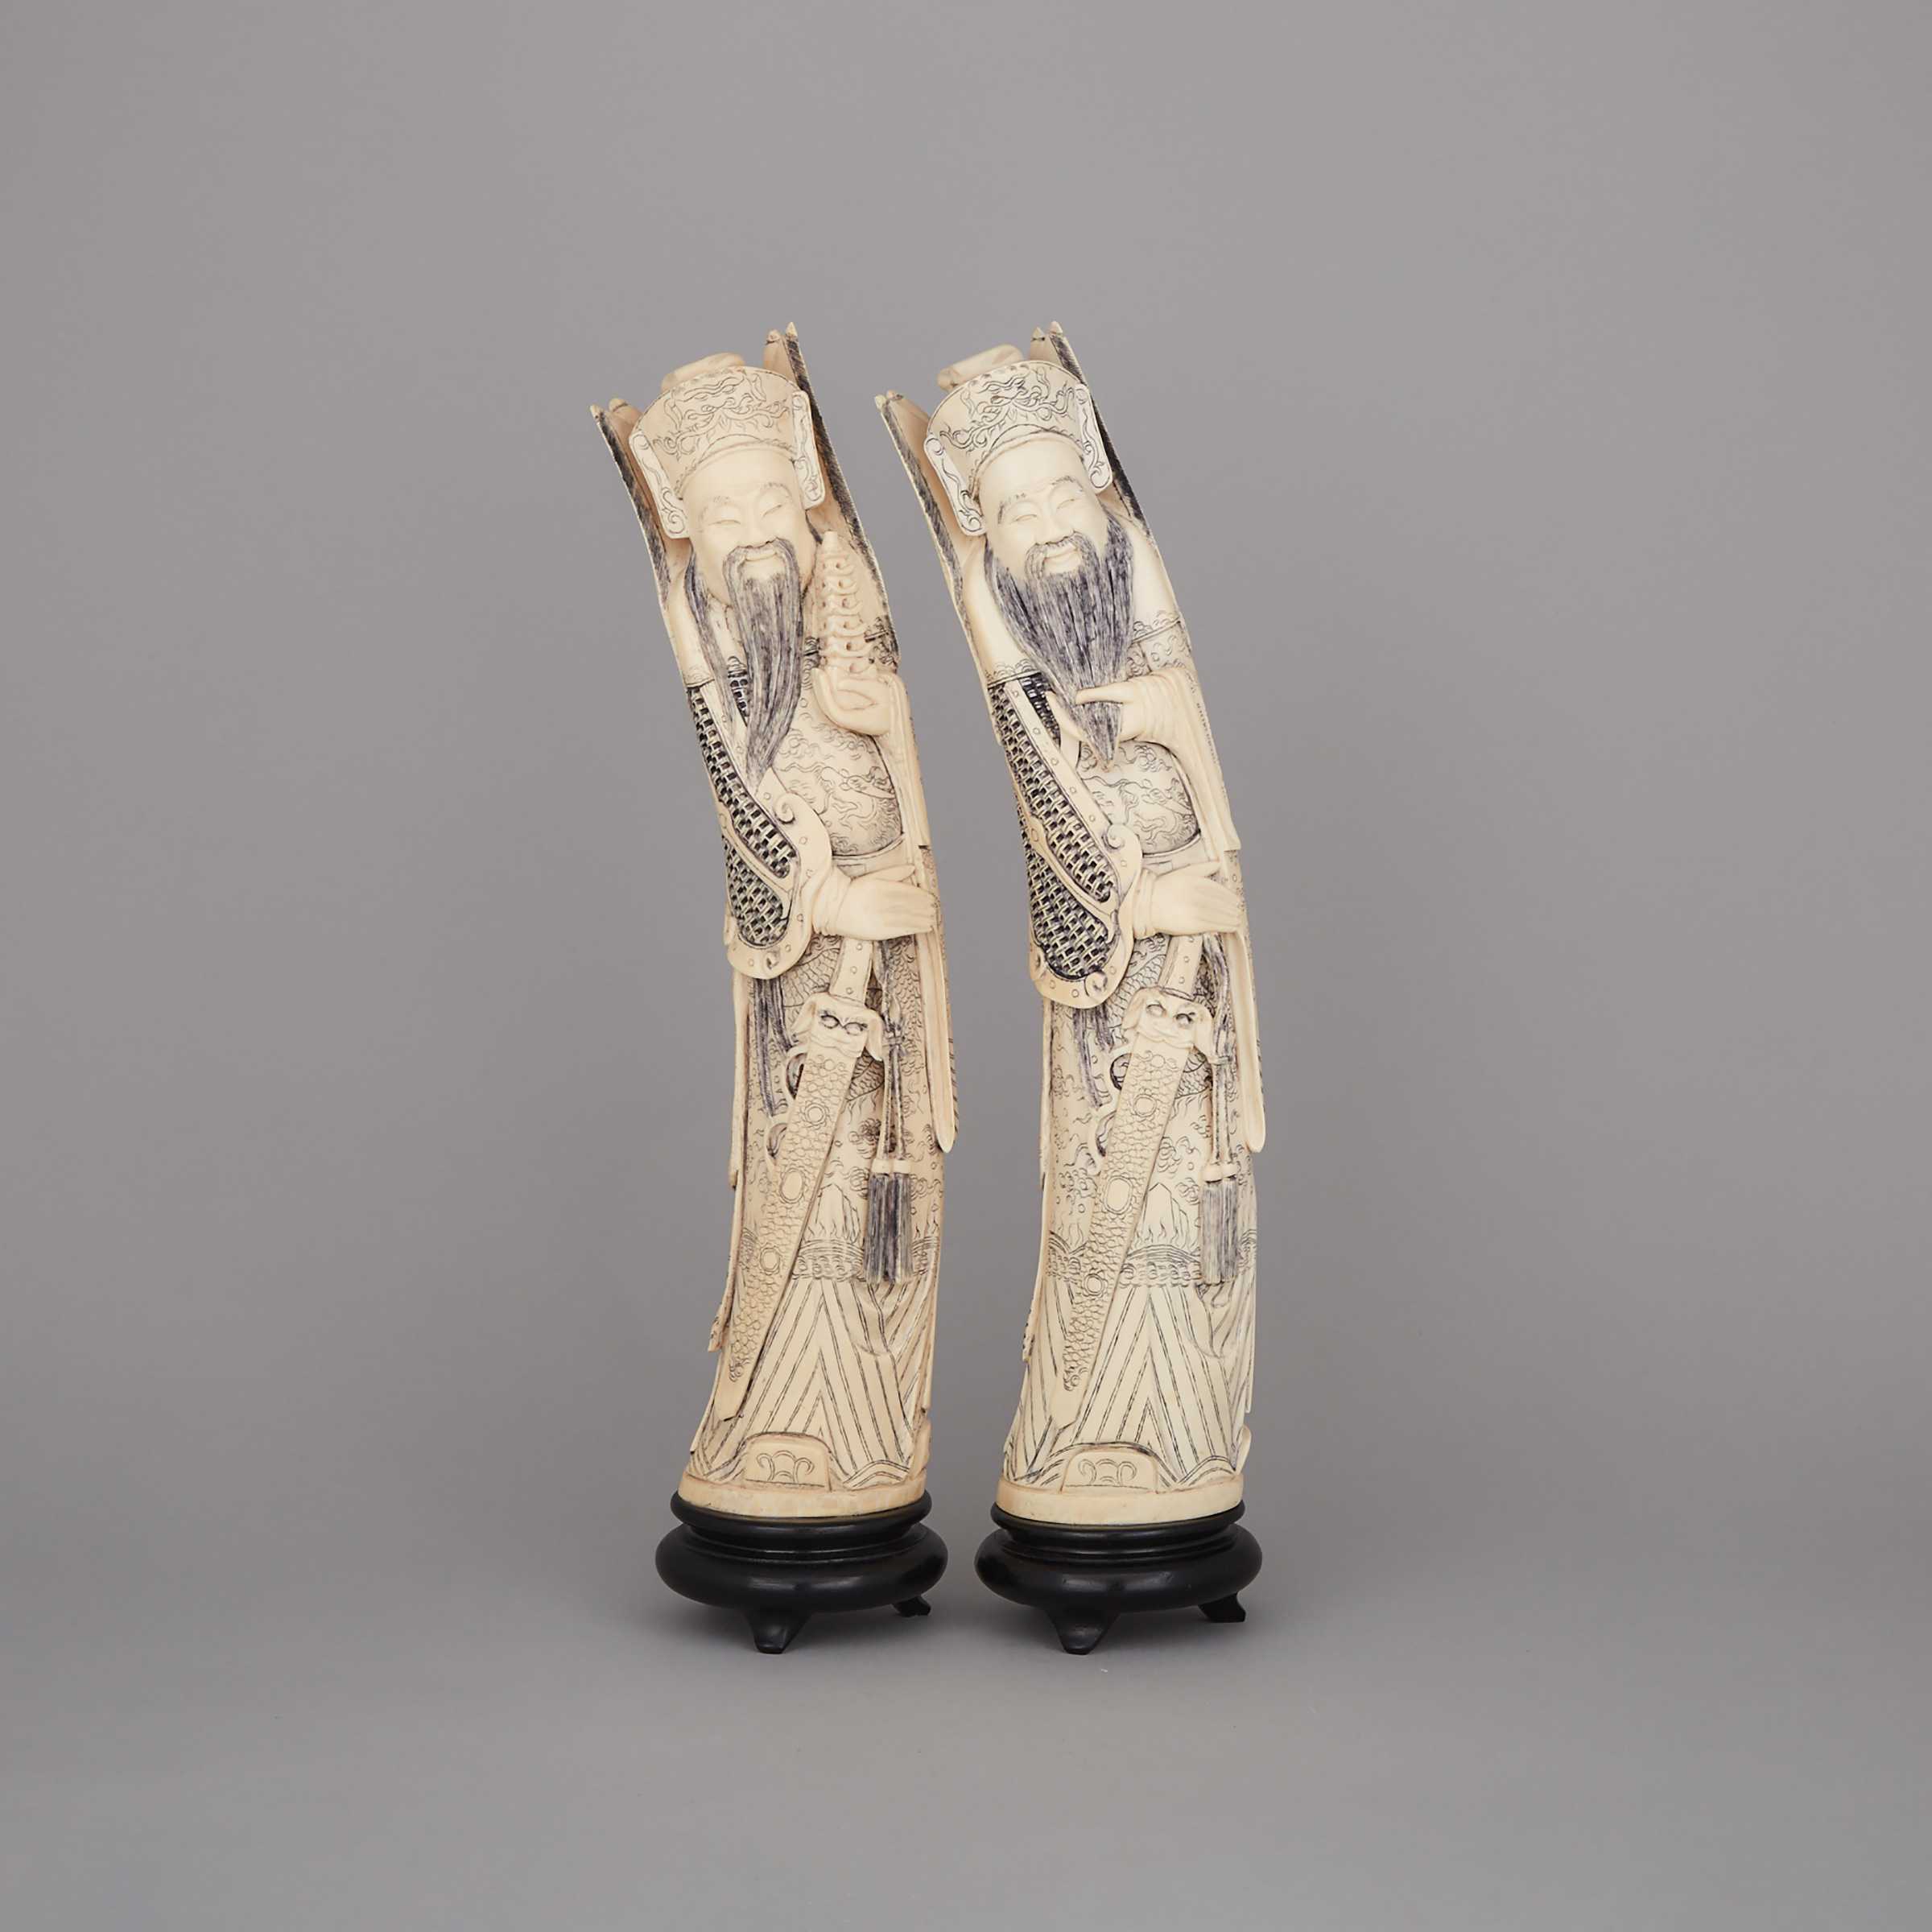 A Pair of Ivory Carved Guardian Immortals, Circa 1900